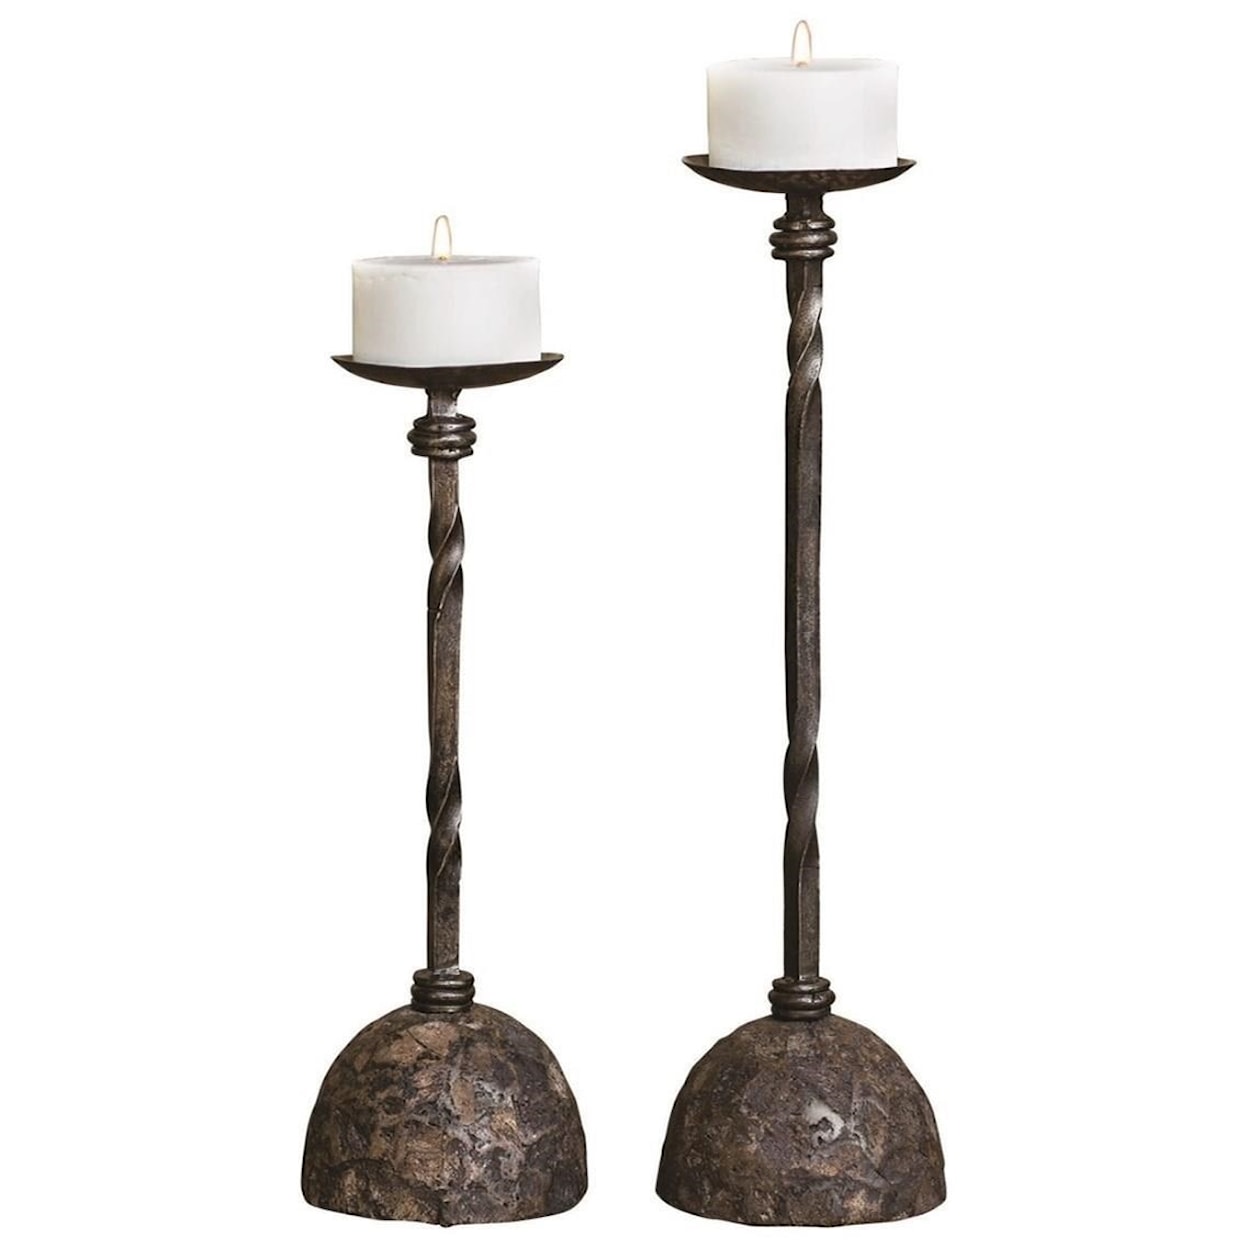 Uttermost Accessories - Candle Holders Keegan Tall Candleholders, Set/2